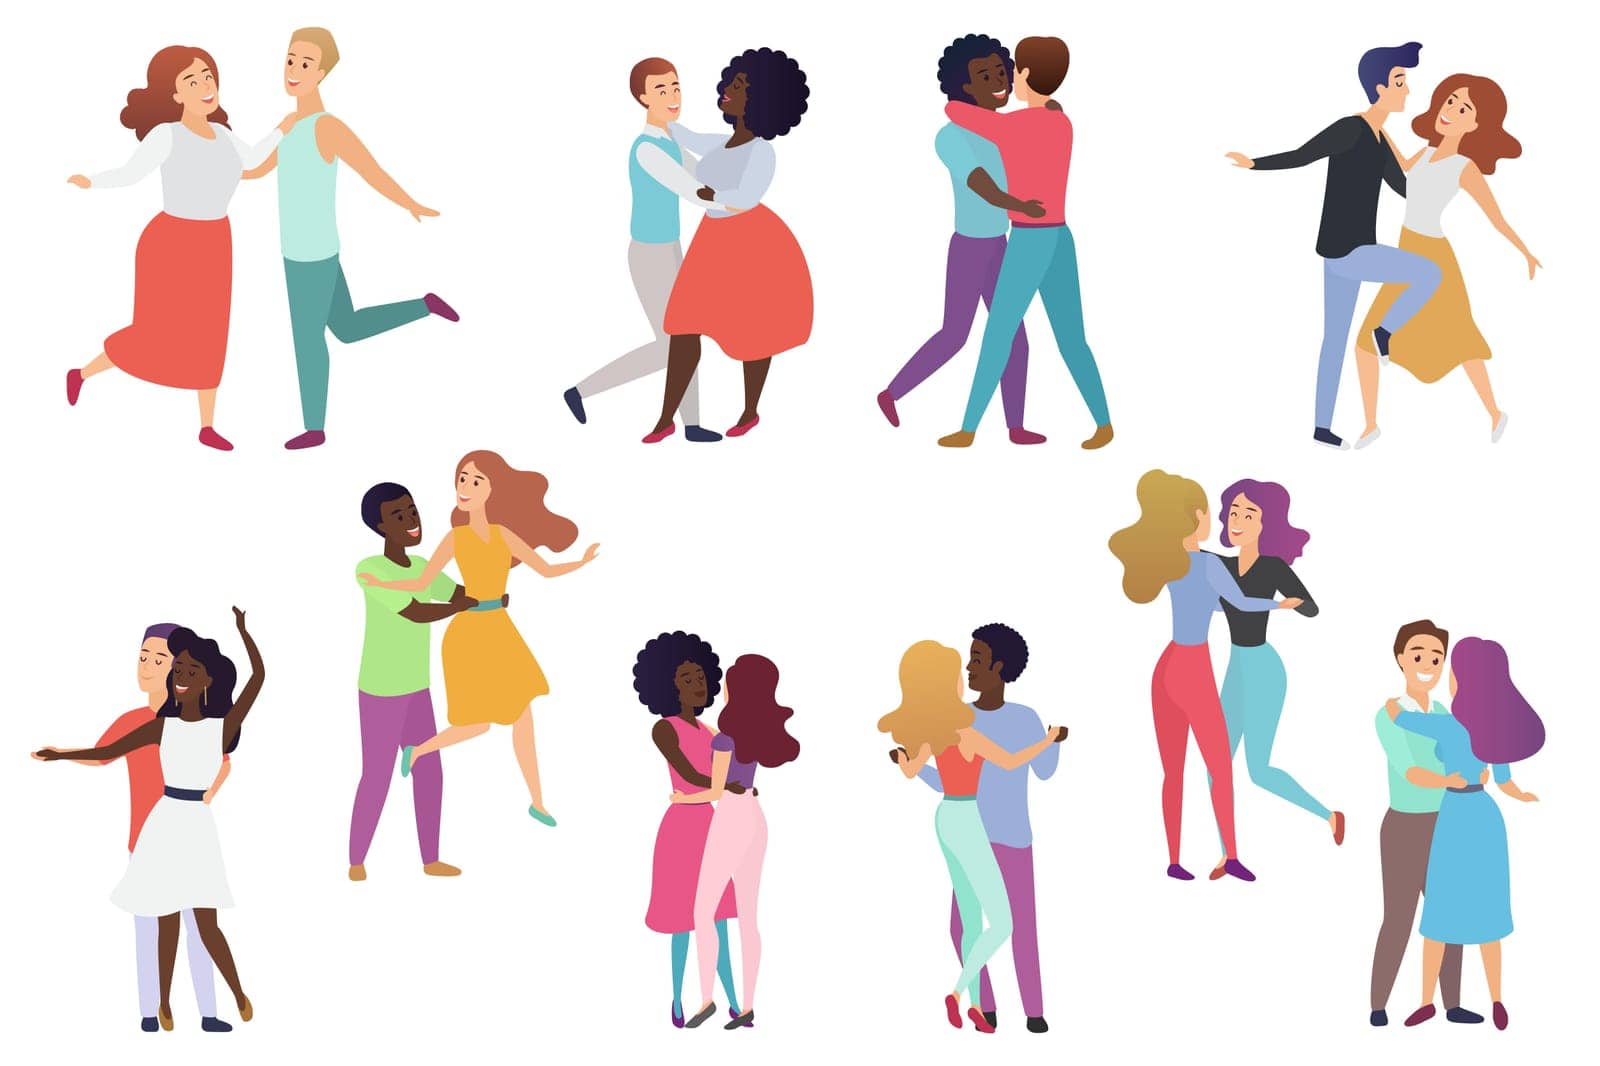 Male and female pairs of dancers. Men and women couple, Group of happy dancing people. People dance party vector illustration